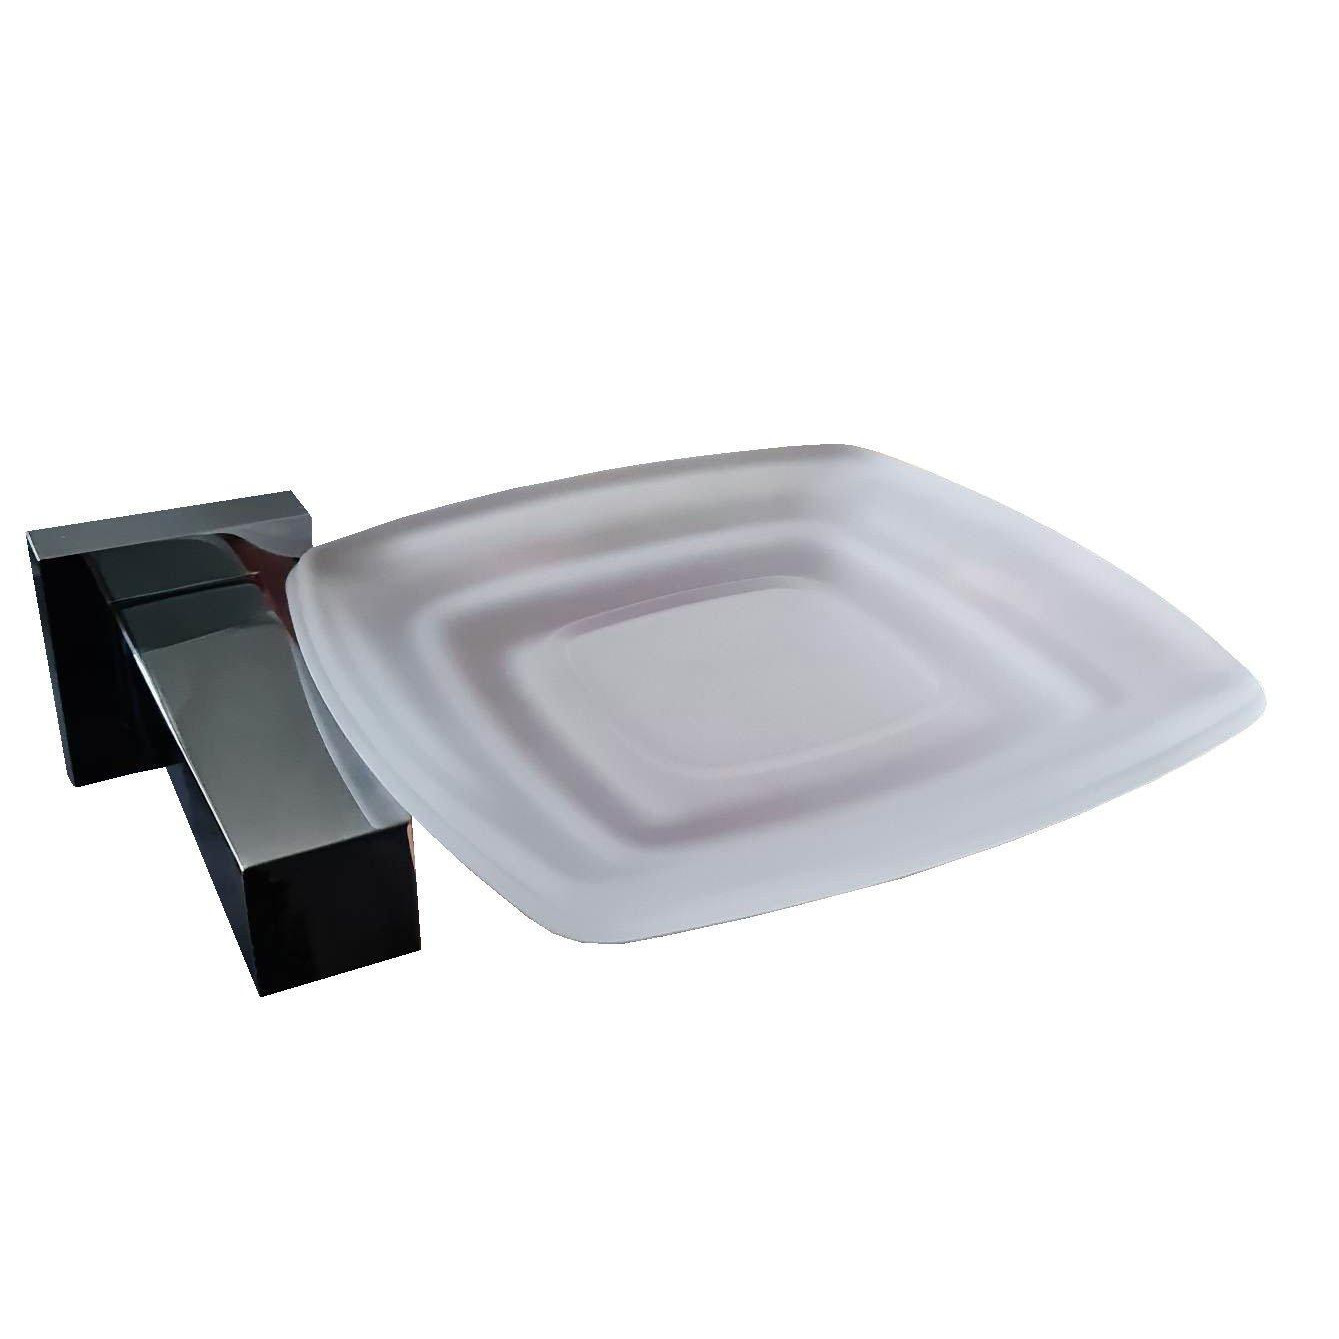 Soap Holder Glass Soap Dish & Holder Wall Mounted Accessory - image 1